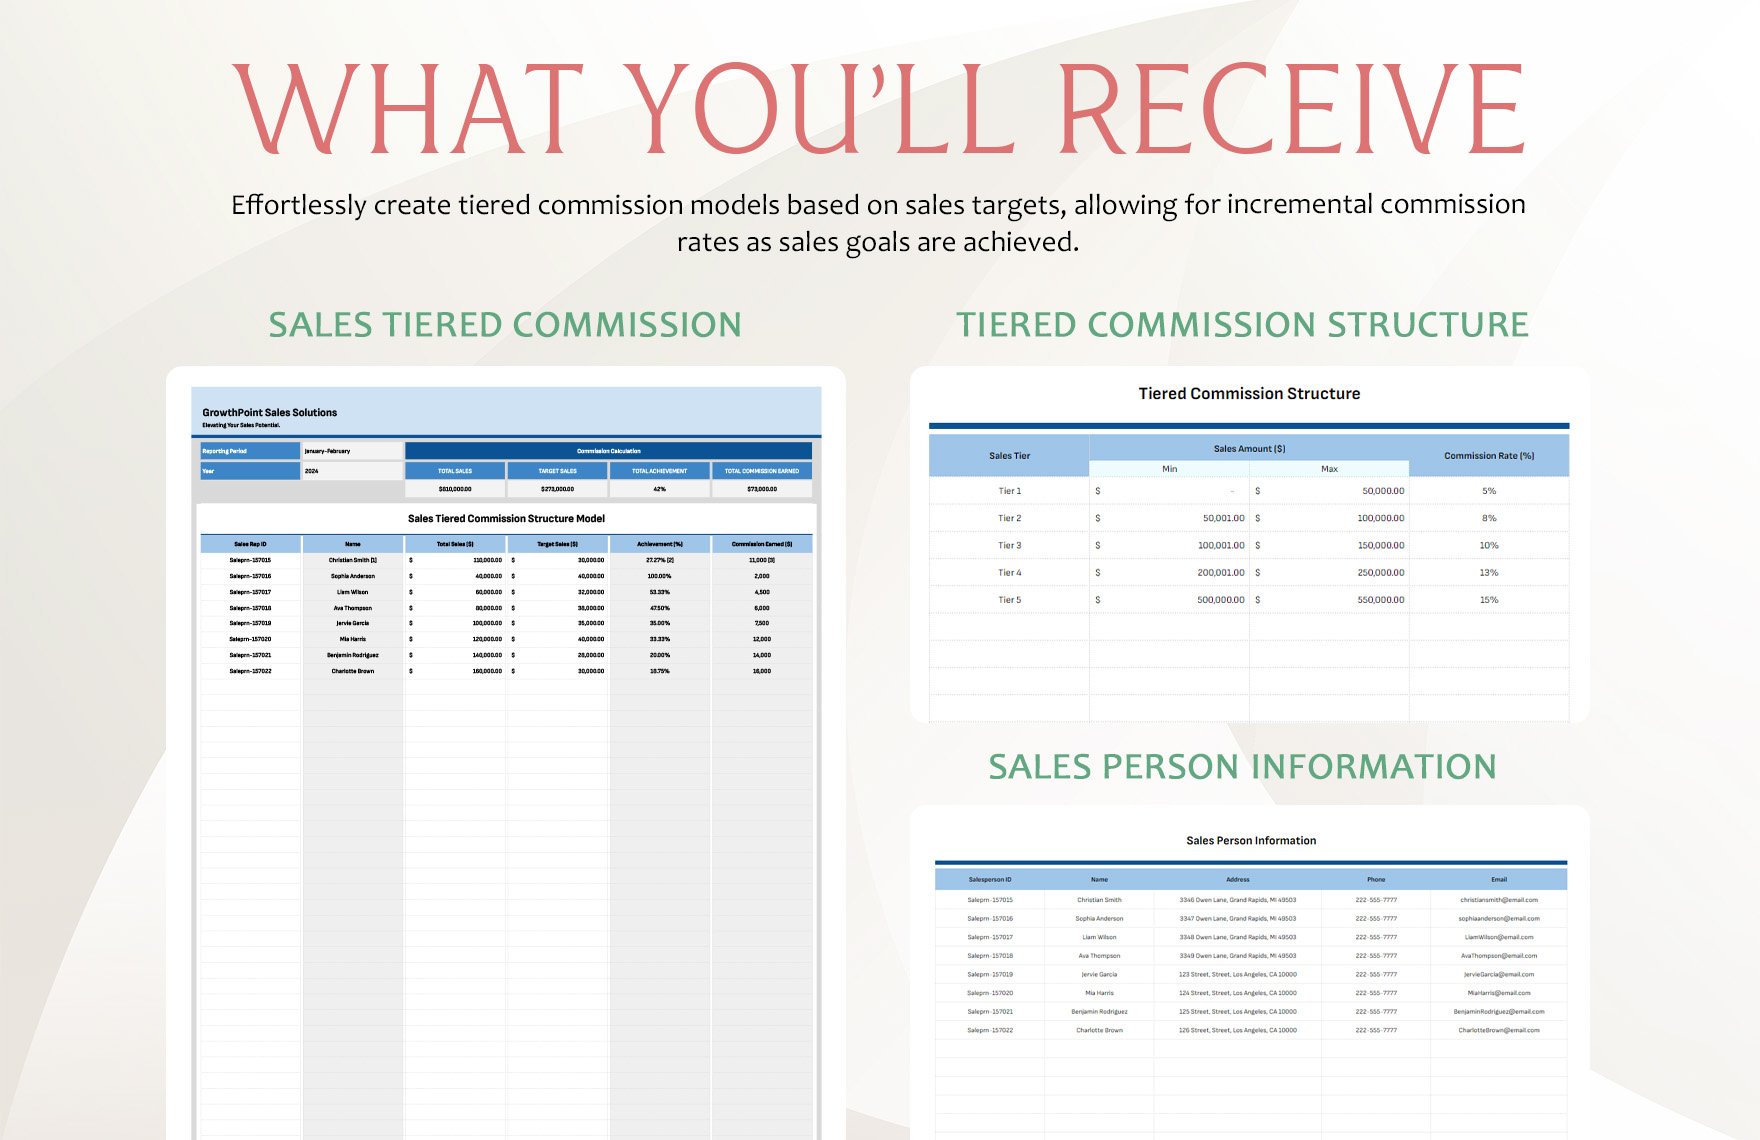 Sales Tiered Commission Structure Model Template